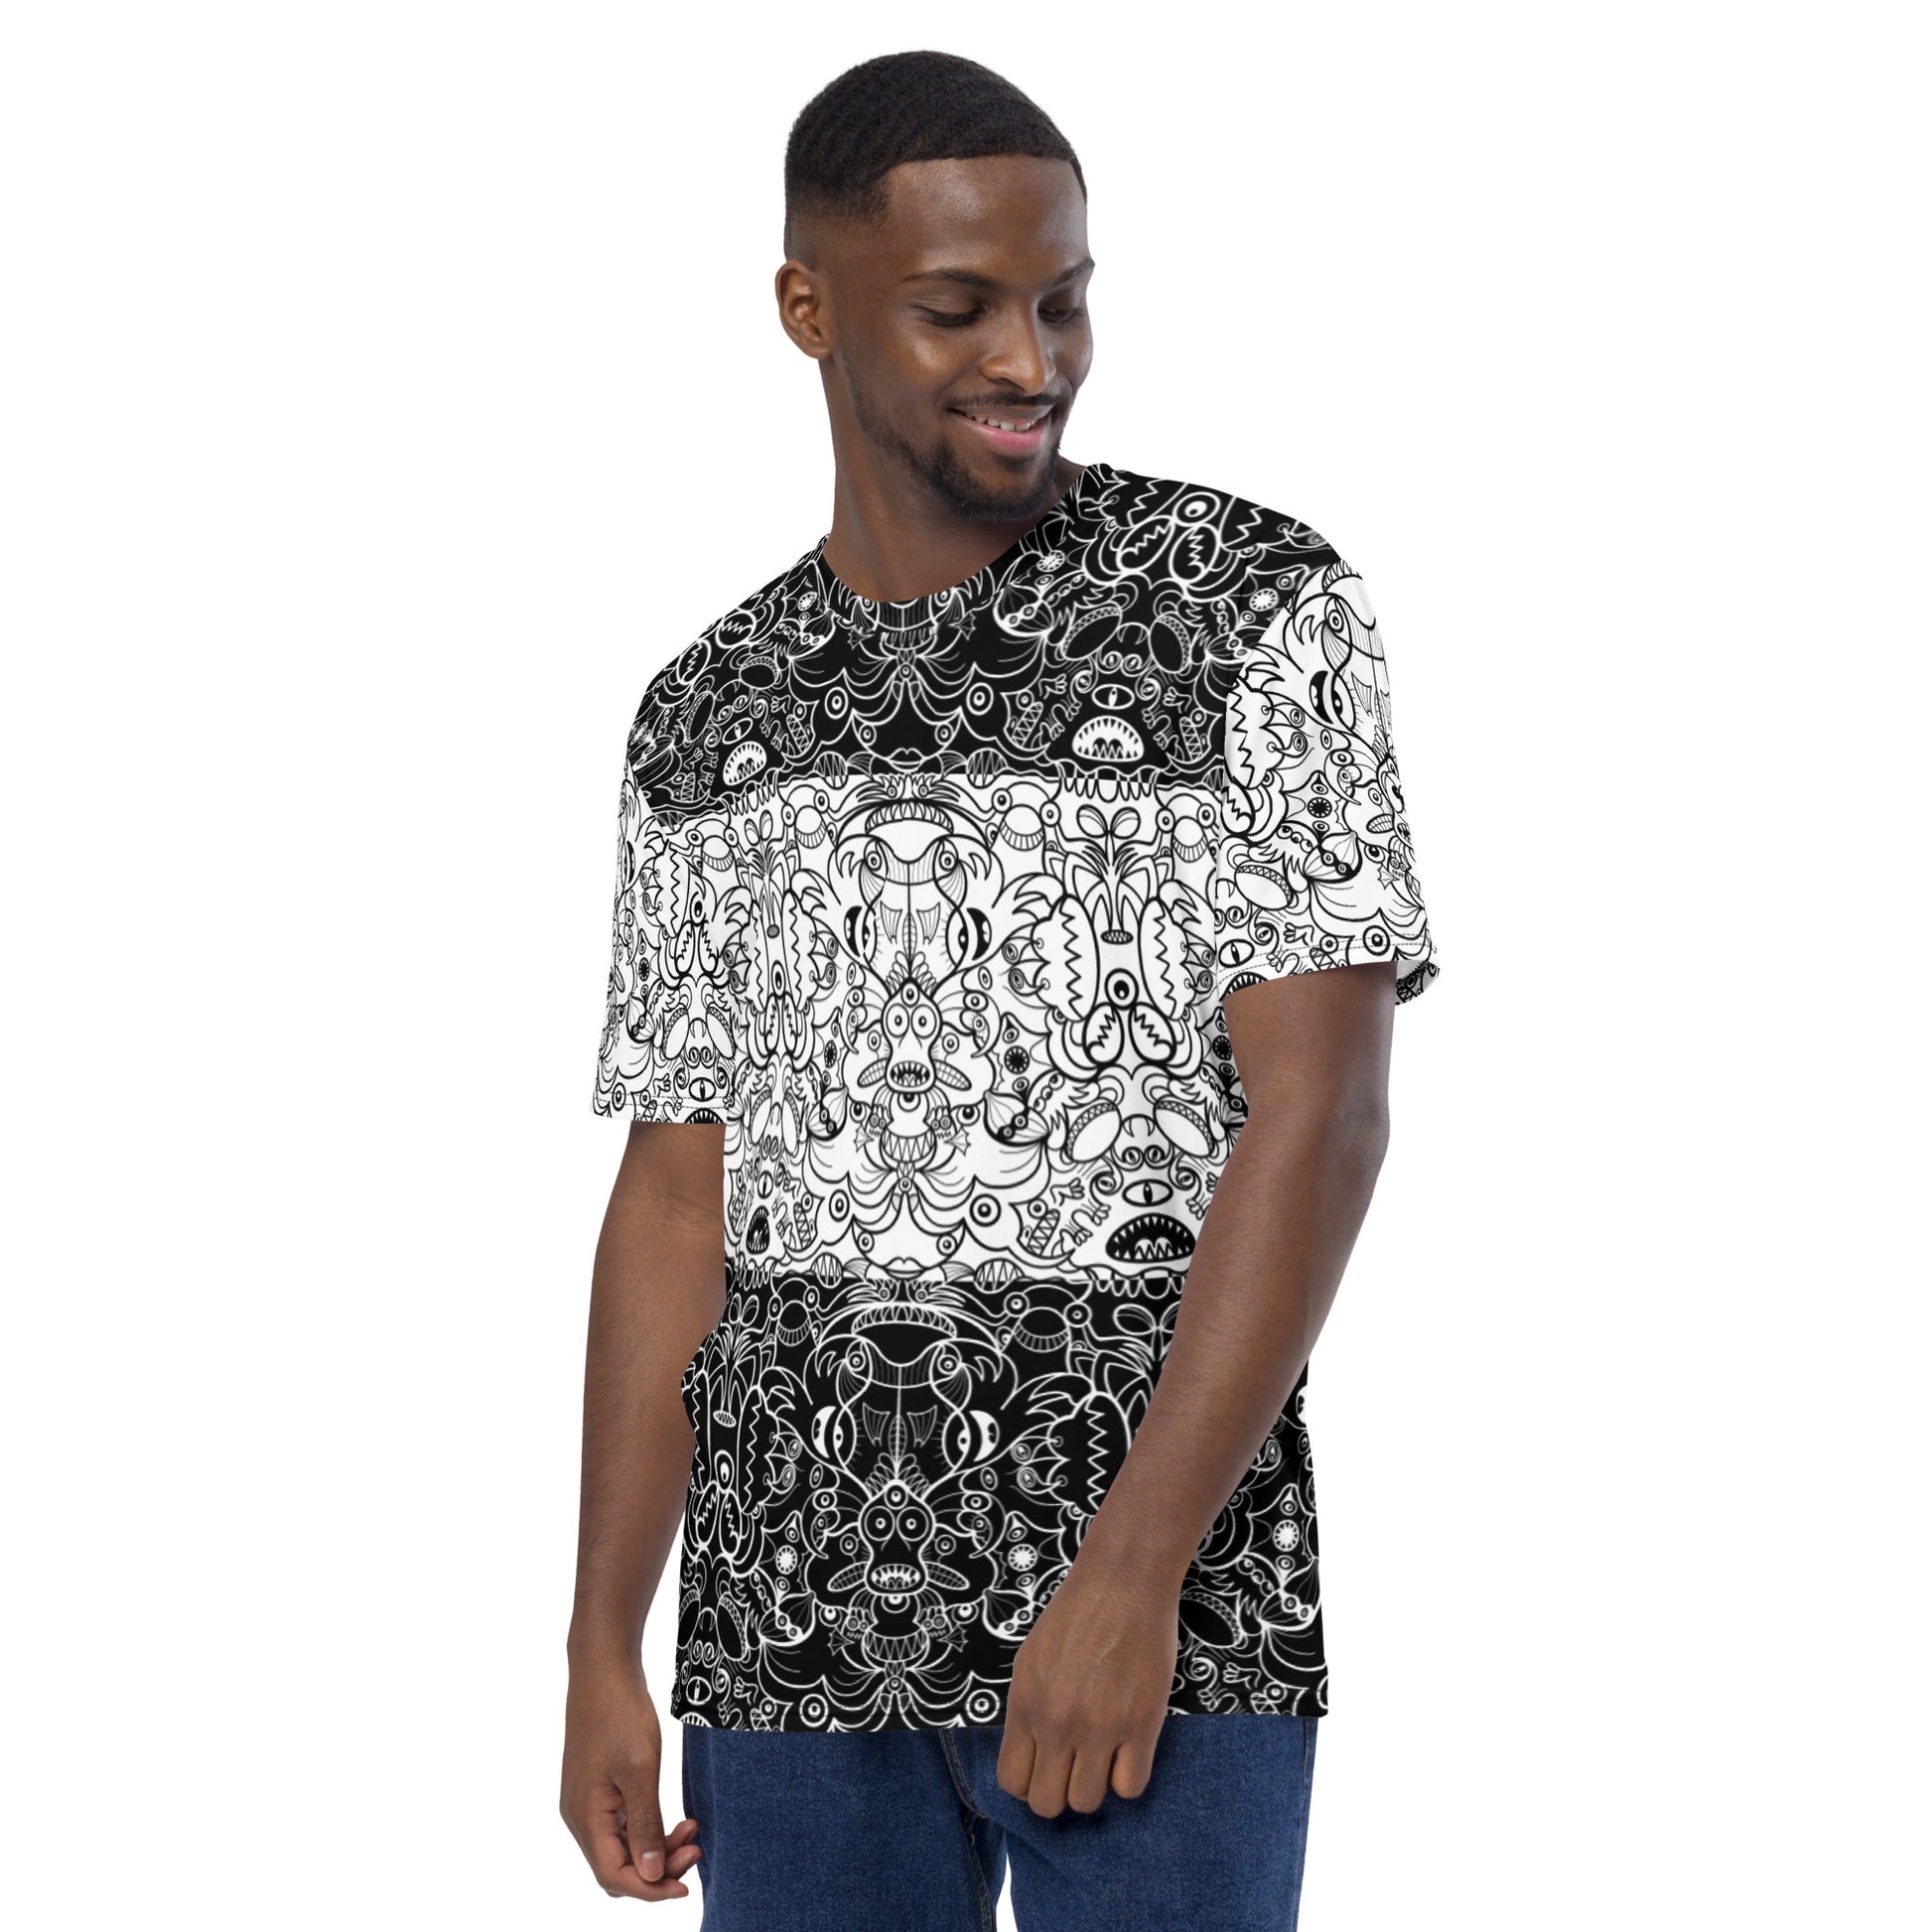 Black and white powerful Doodle world and vice versa Men's all over print t-shirt. Left view